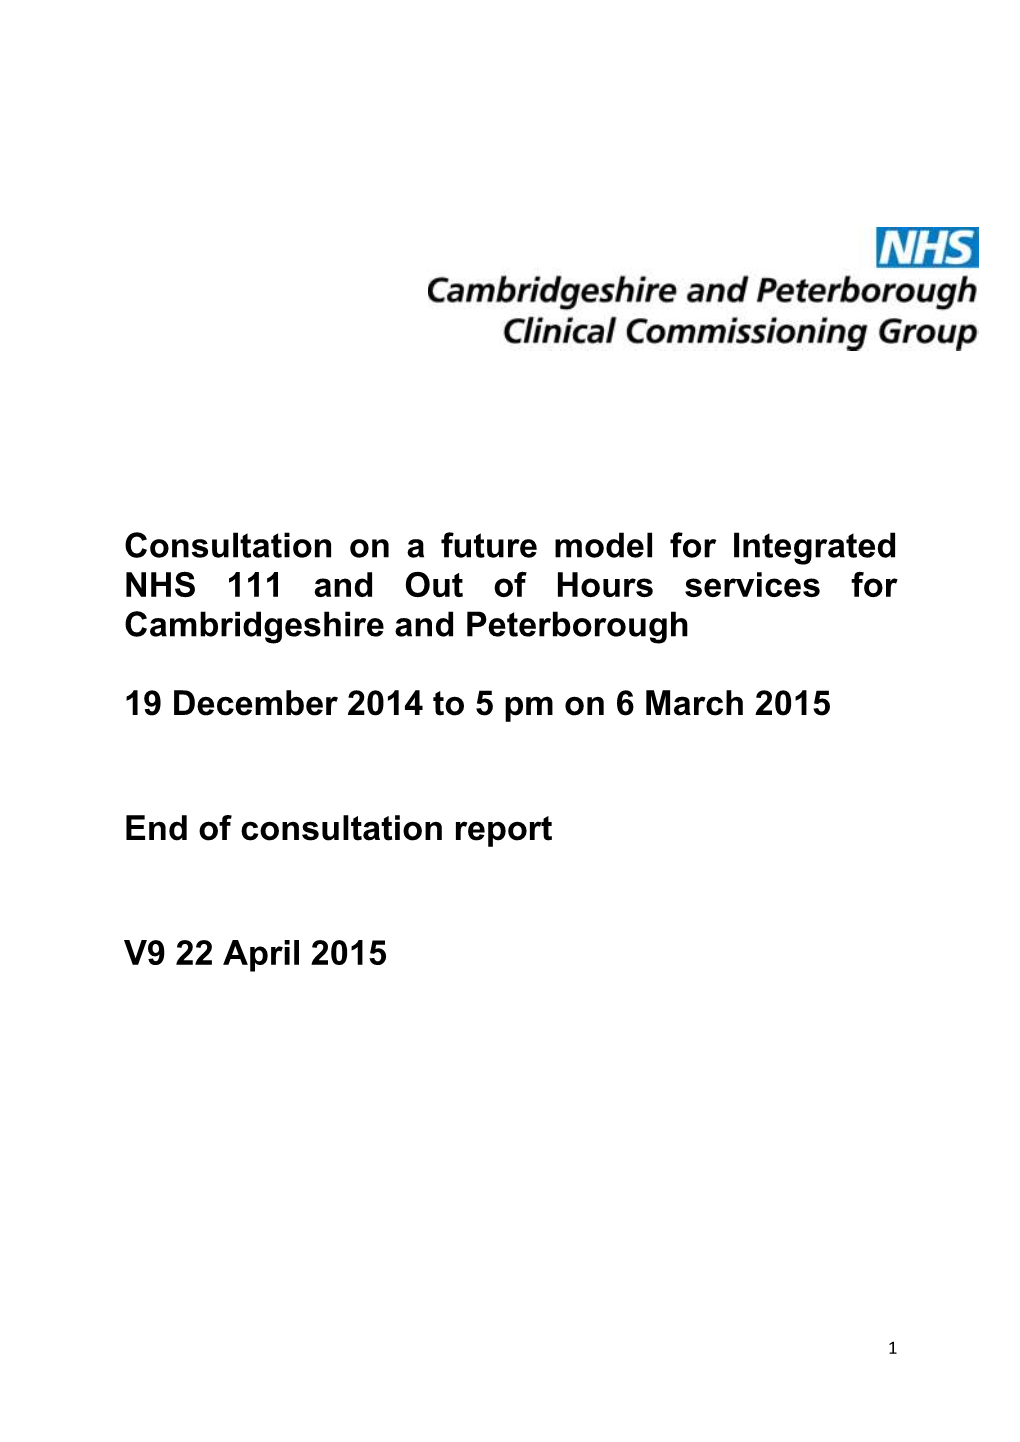 Consultation on a Future Model for Integrated NHS 111 and out of Hours Services for Cambridgeshire and Peterborough